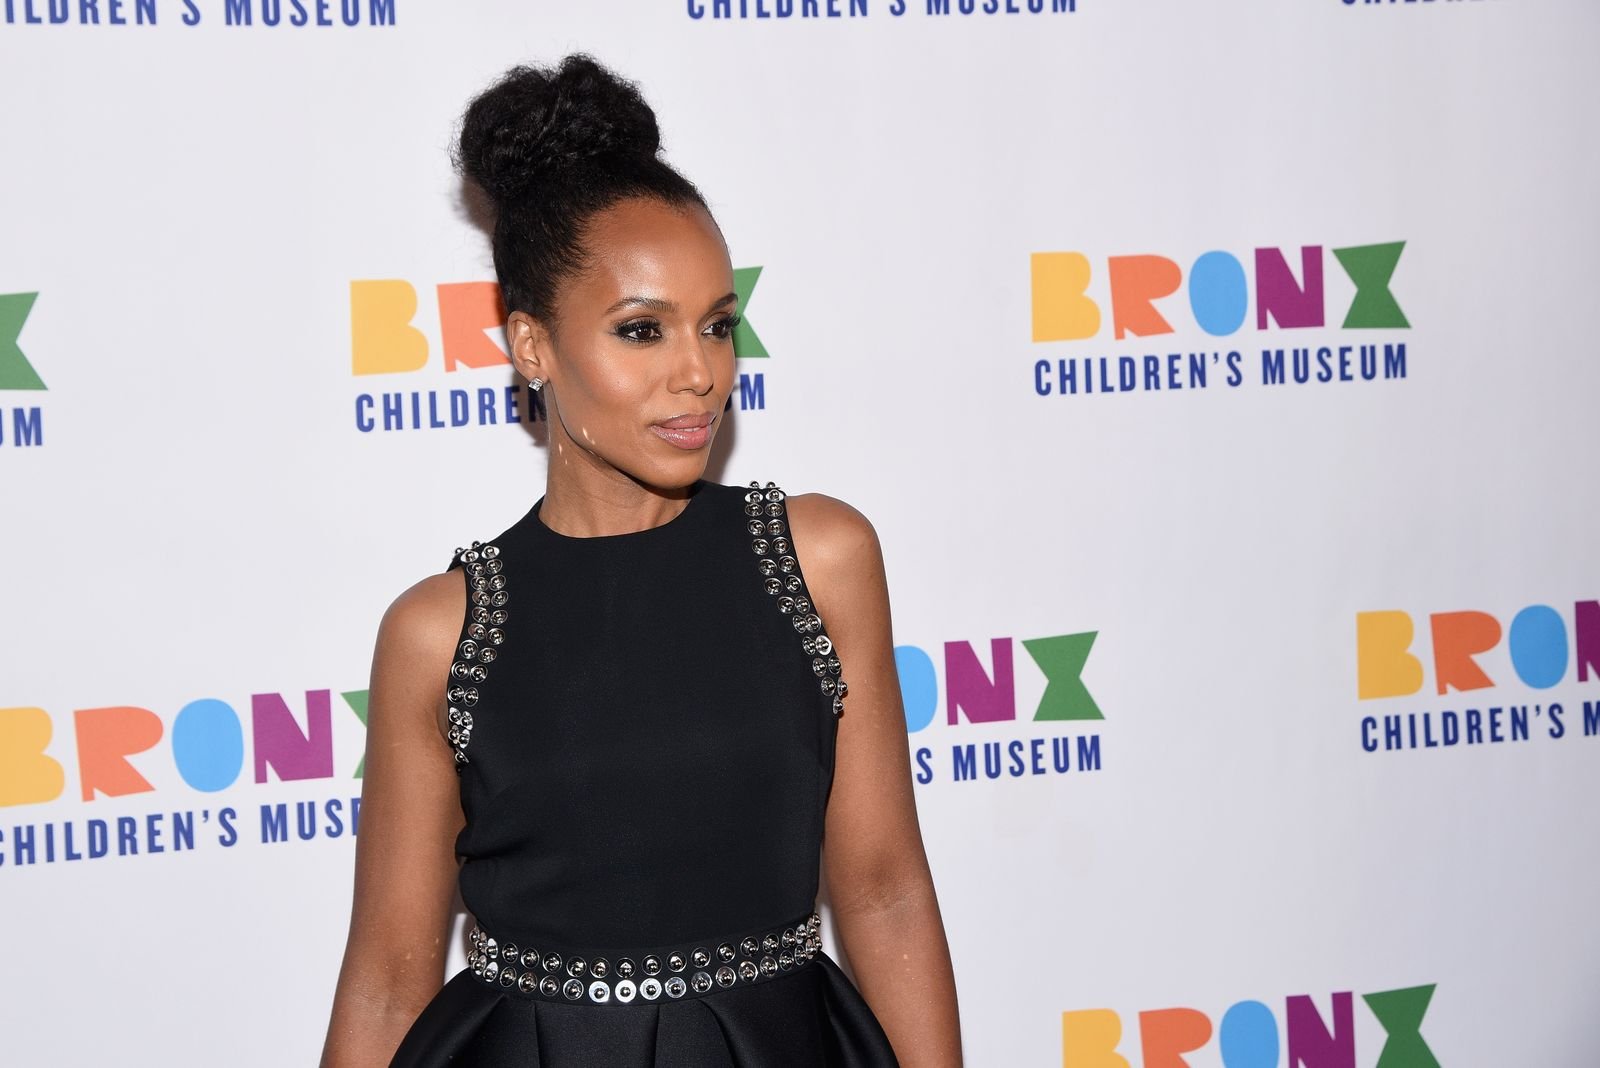 Kerry Washington attends the Bronx Children's Museum Gala at Edison Ballroom on May 8, 2018 | Photo: Getty Images